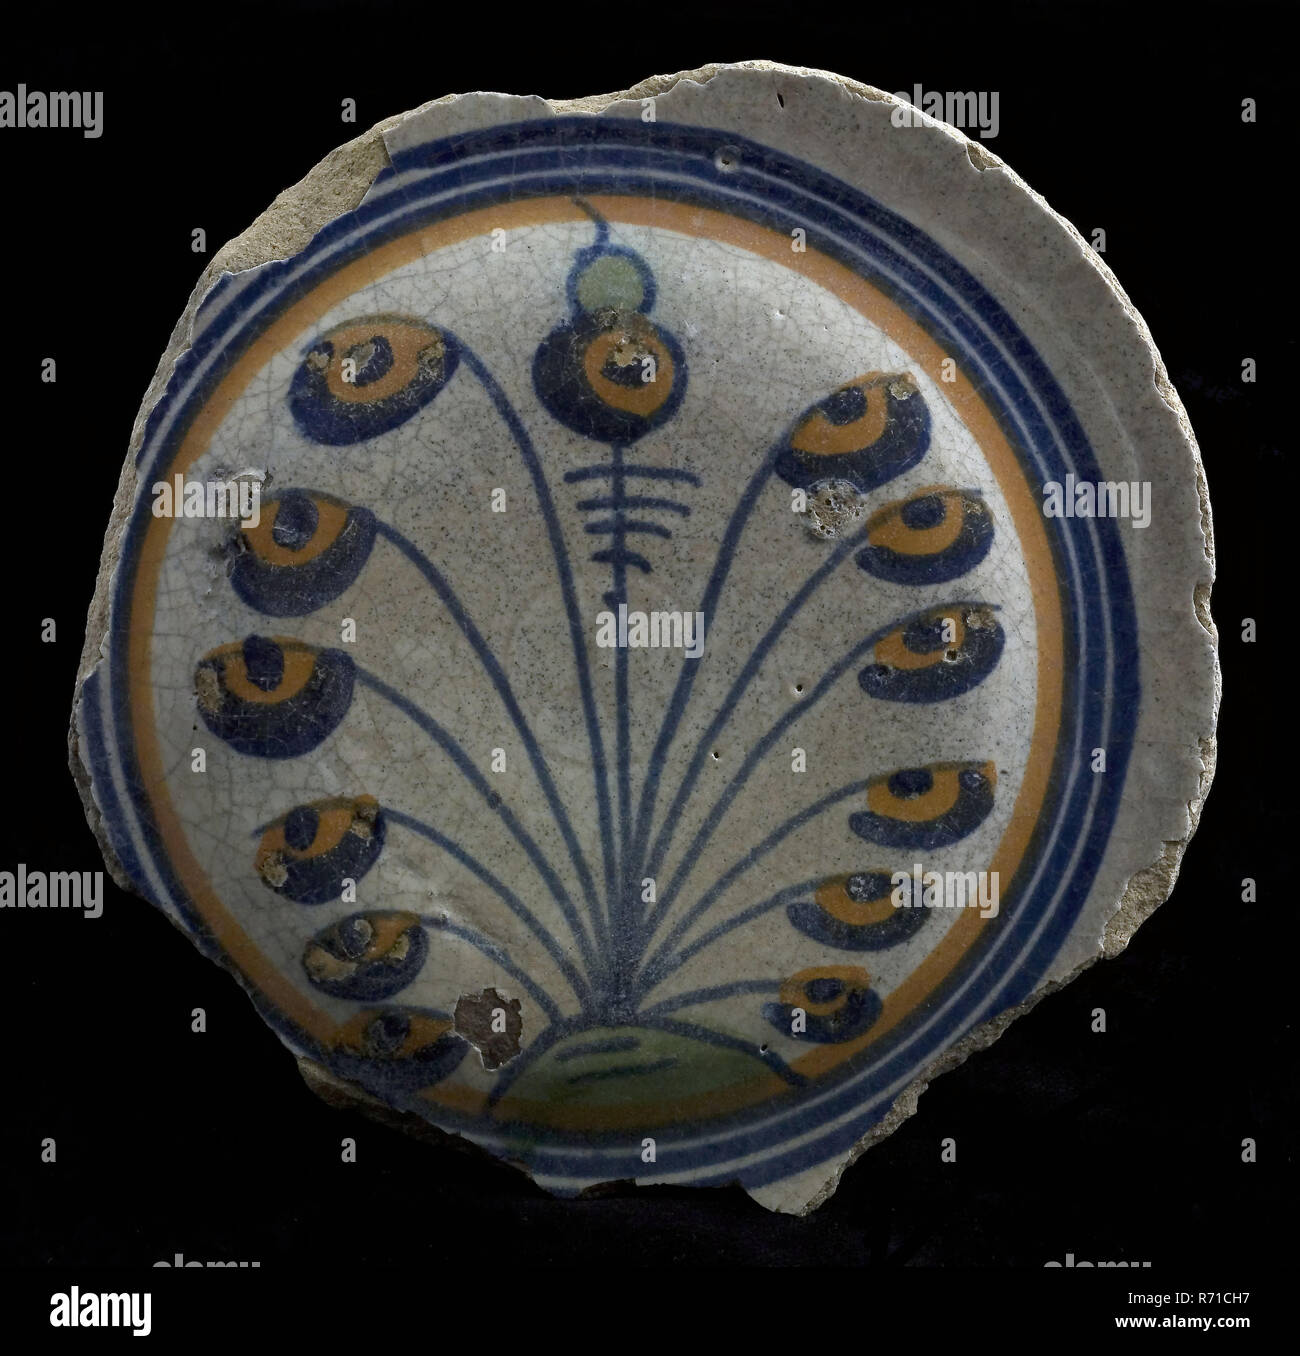 Fragment majolica dish, polychrome, flower with buds on fan-shaped stalks, plate crockery holder soil find ceramic earthenware enamel, baked underside covered with lead glaze. Polychrome waised soul of pancake dish or salad dish archeology decorate food serve tulip variety Stock Photo